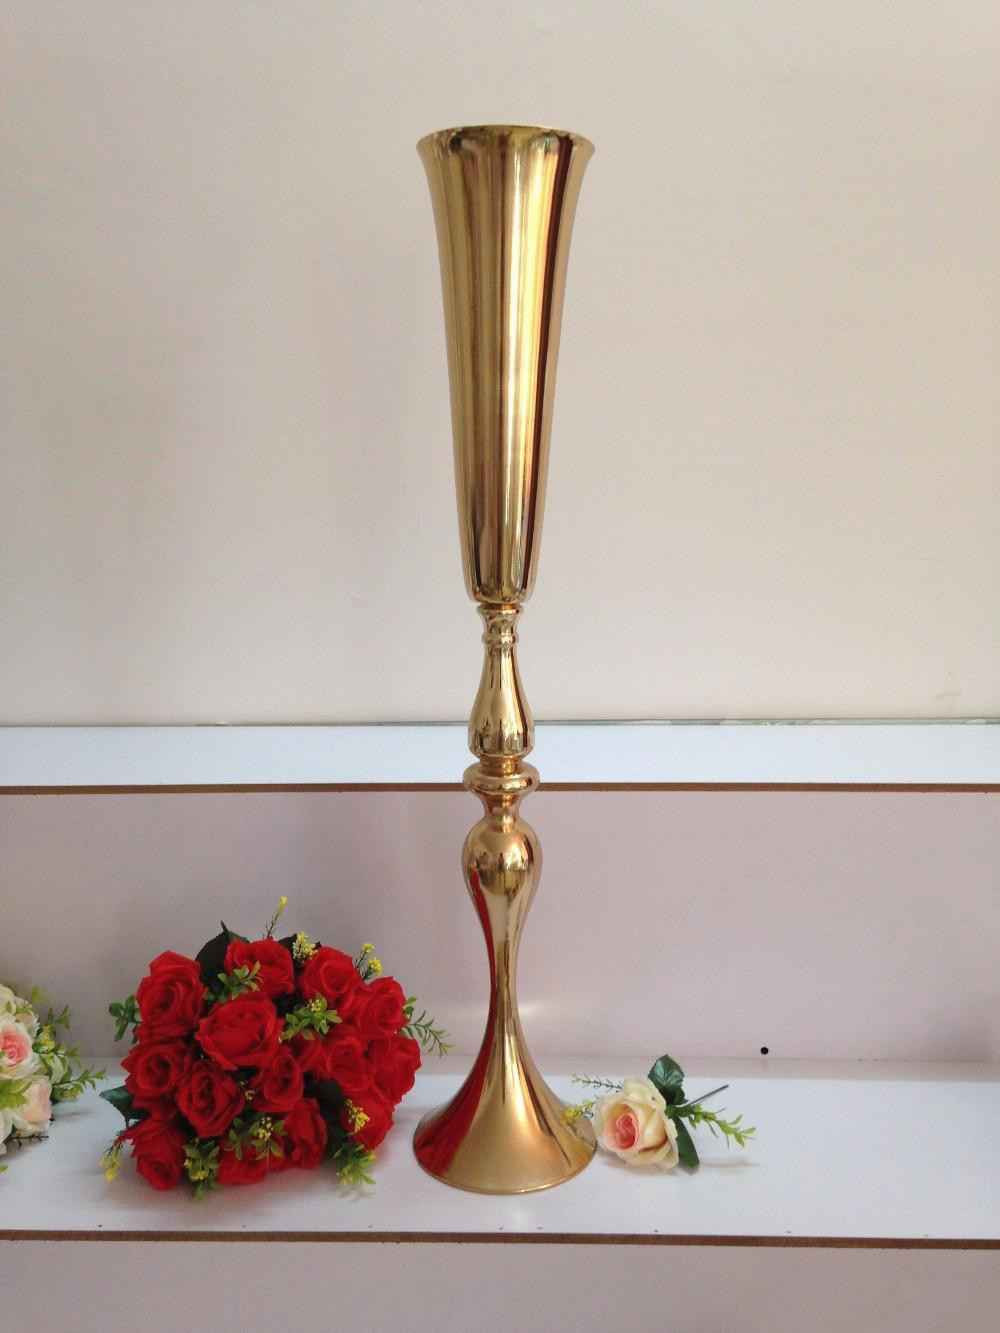 30 inch tall vases of image of tall gold vase vases artificial plants collection with regard to tall gold vase photos faux crystal candle holders alive vases gold tall jpgi 0d cheap in